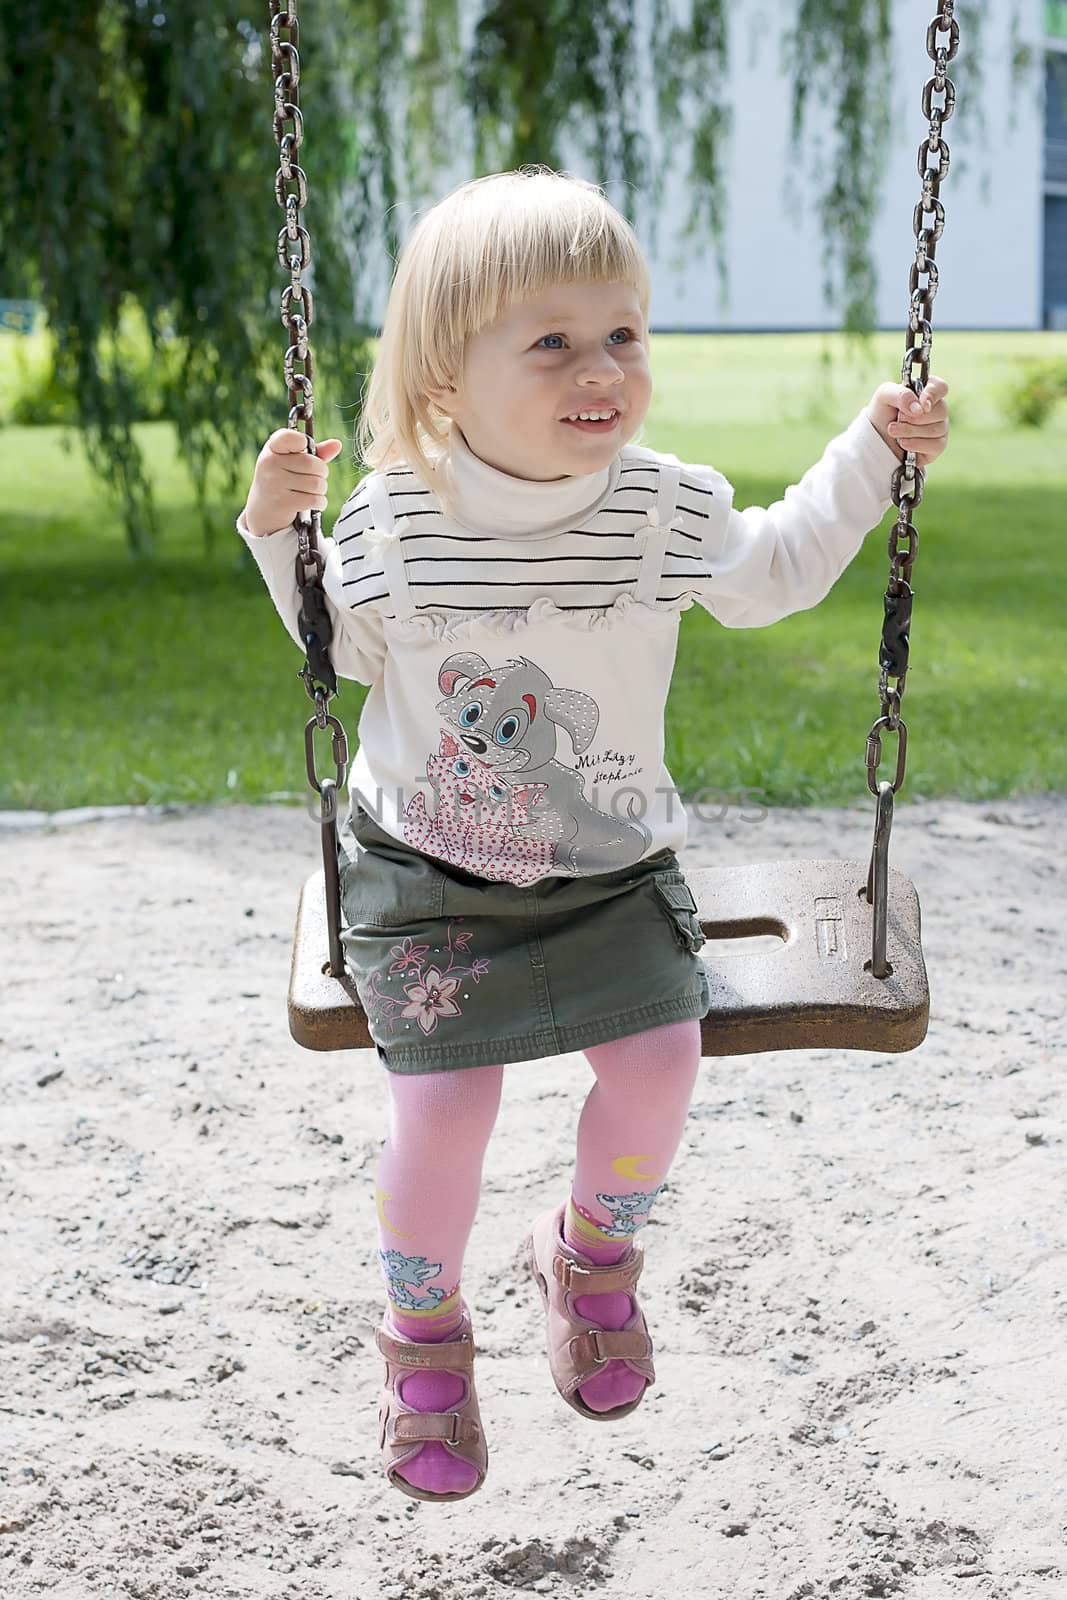 Happy little girl riding on a swing in the park shooting